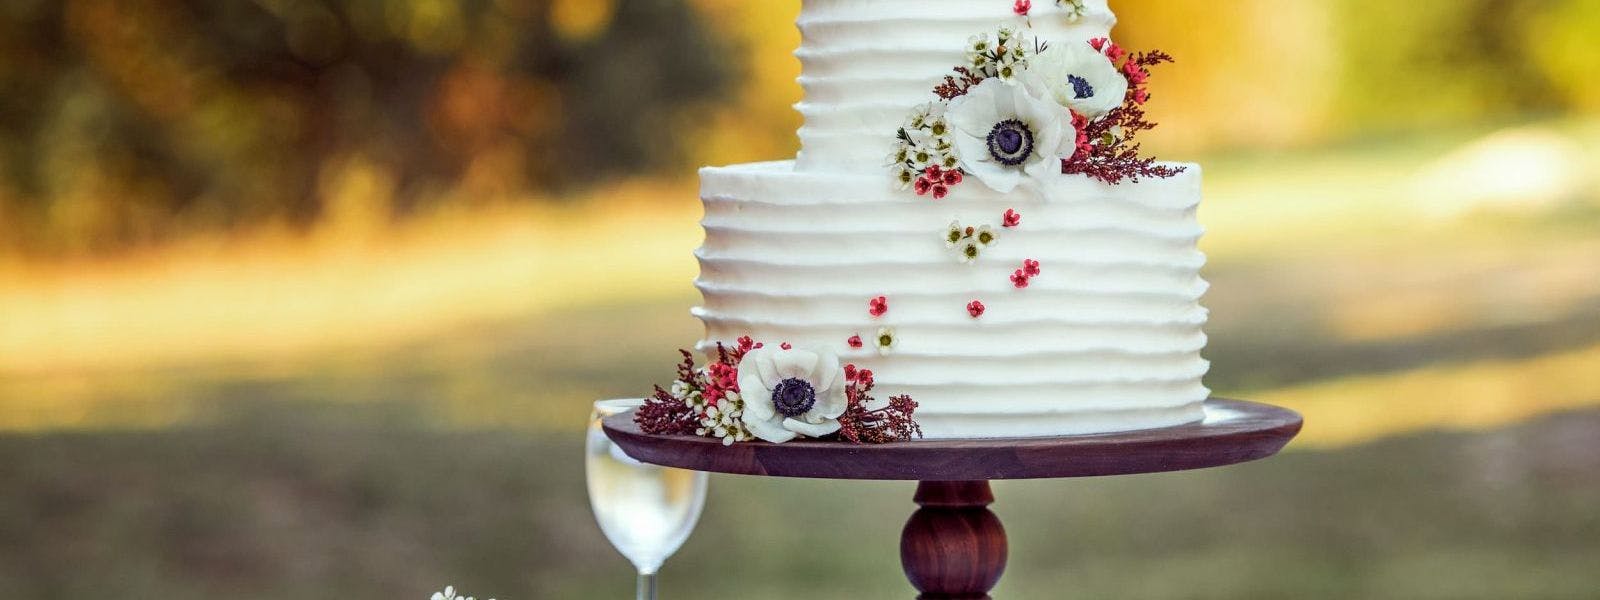 GORGEOUS WEDDING CAKES IN CHARLOTTESVILLE